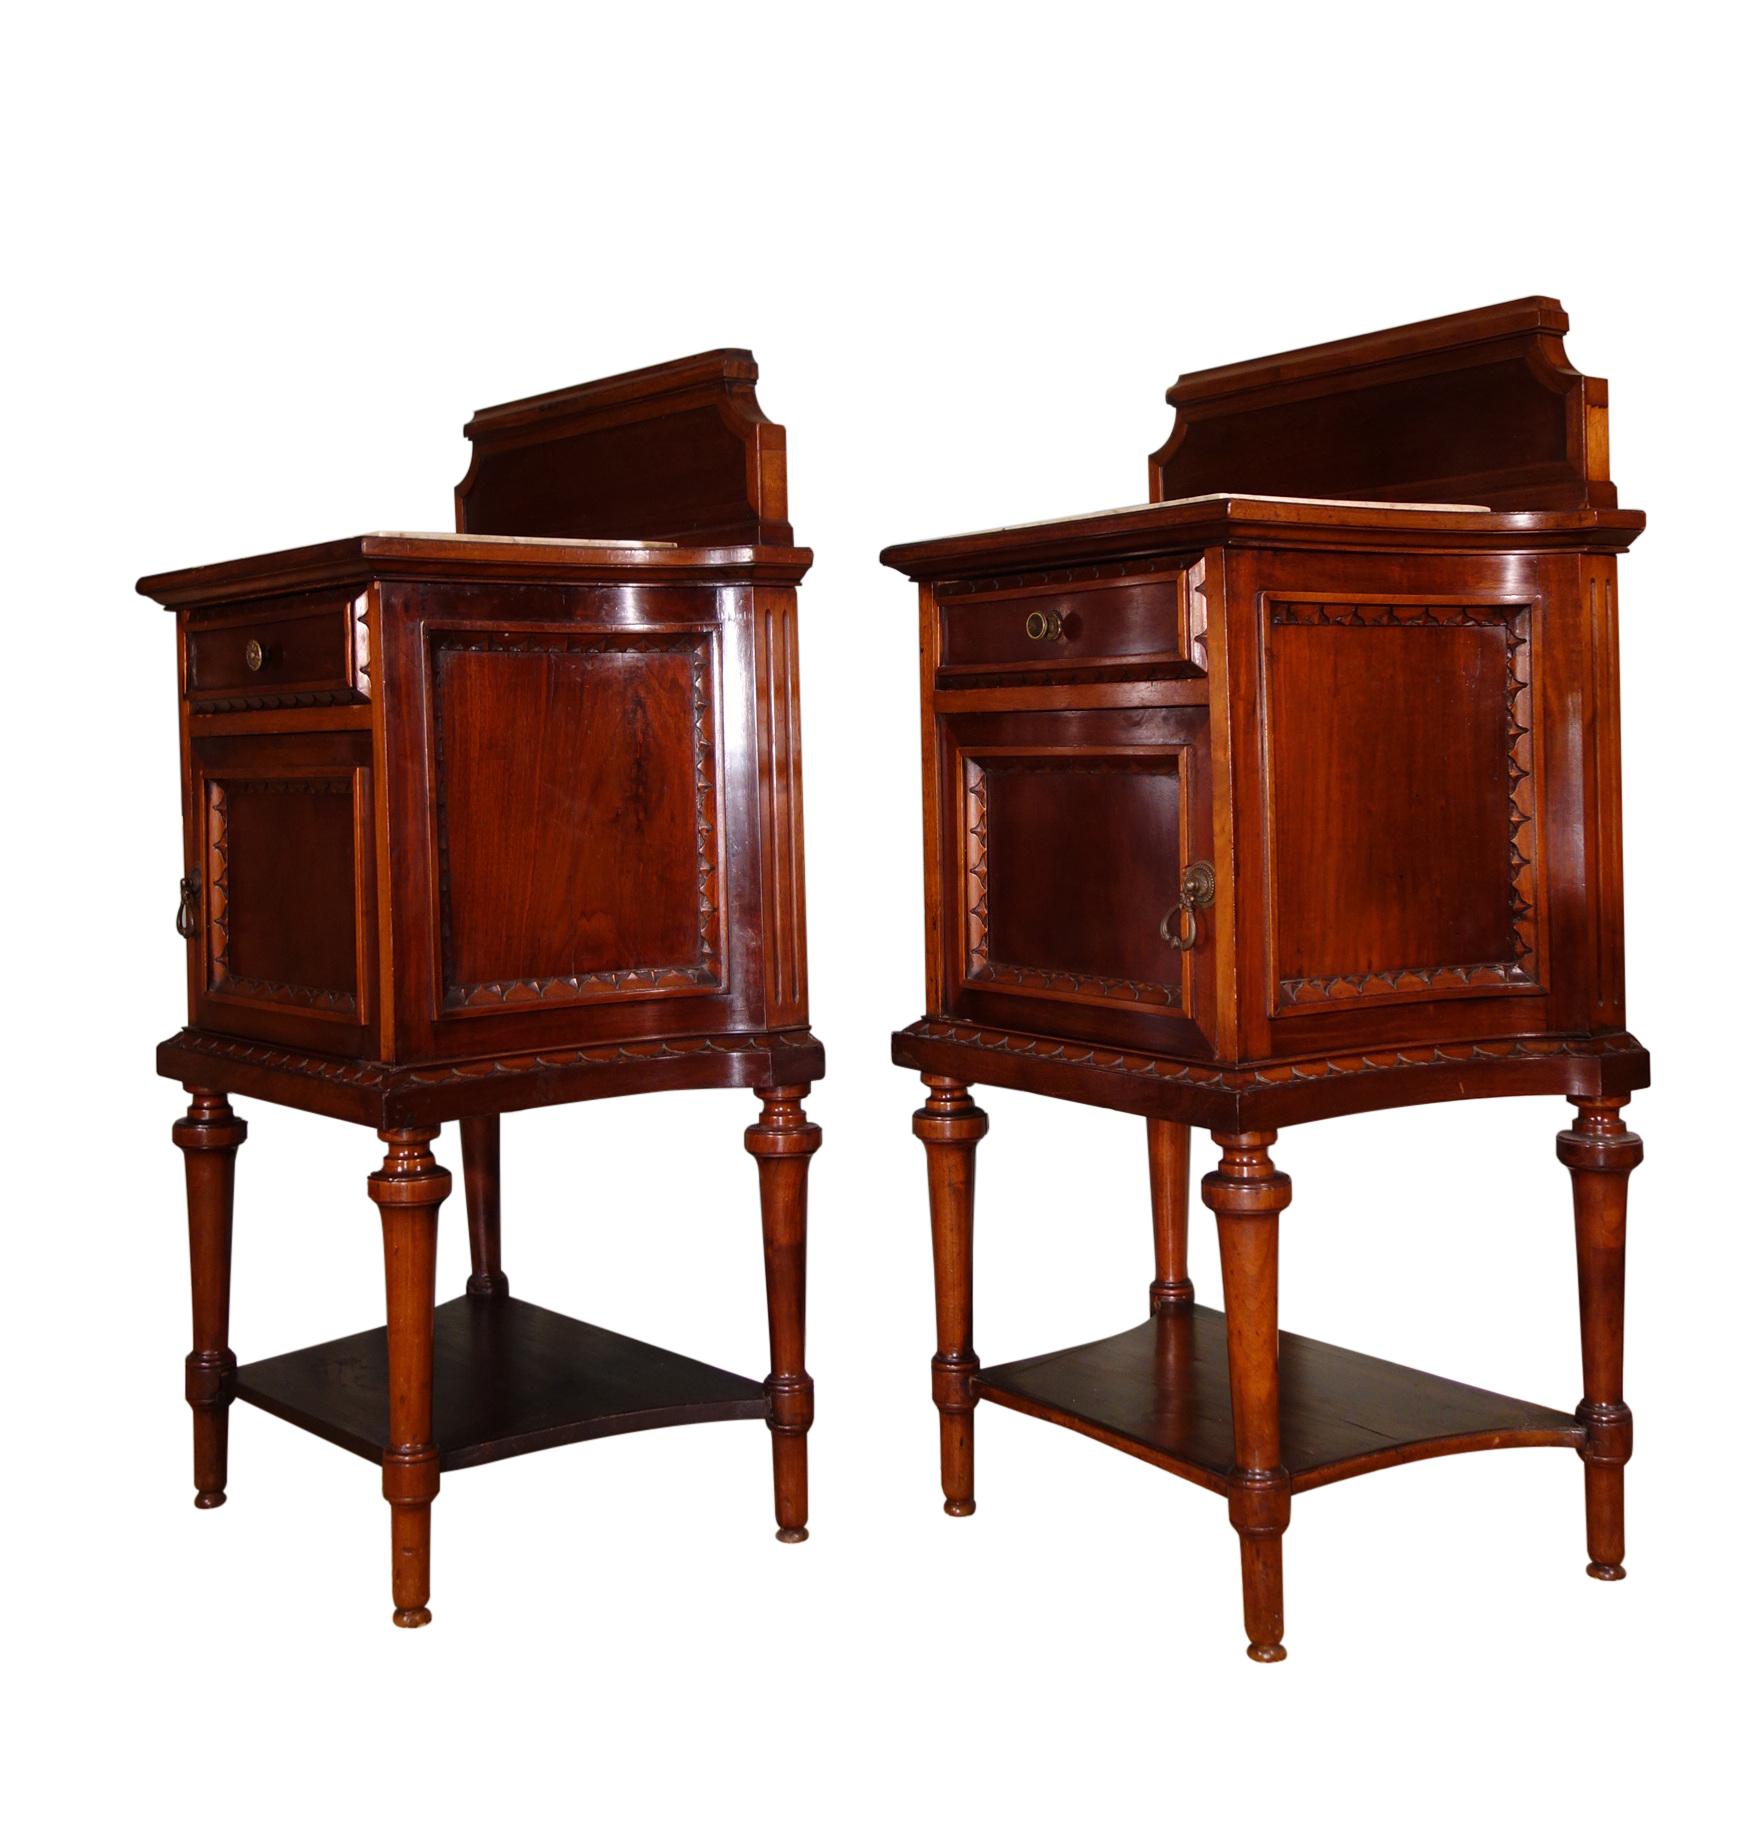 Pair of 19th century 1 drawer and 1 door nightstand tables. Likely commissioned for a noble family to accompany our separately listed King bed frame and dresser with mirror, the handcraft composition and detail is of the finest quality. Cabinet